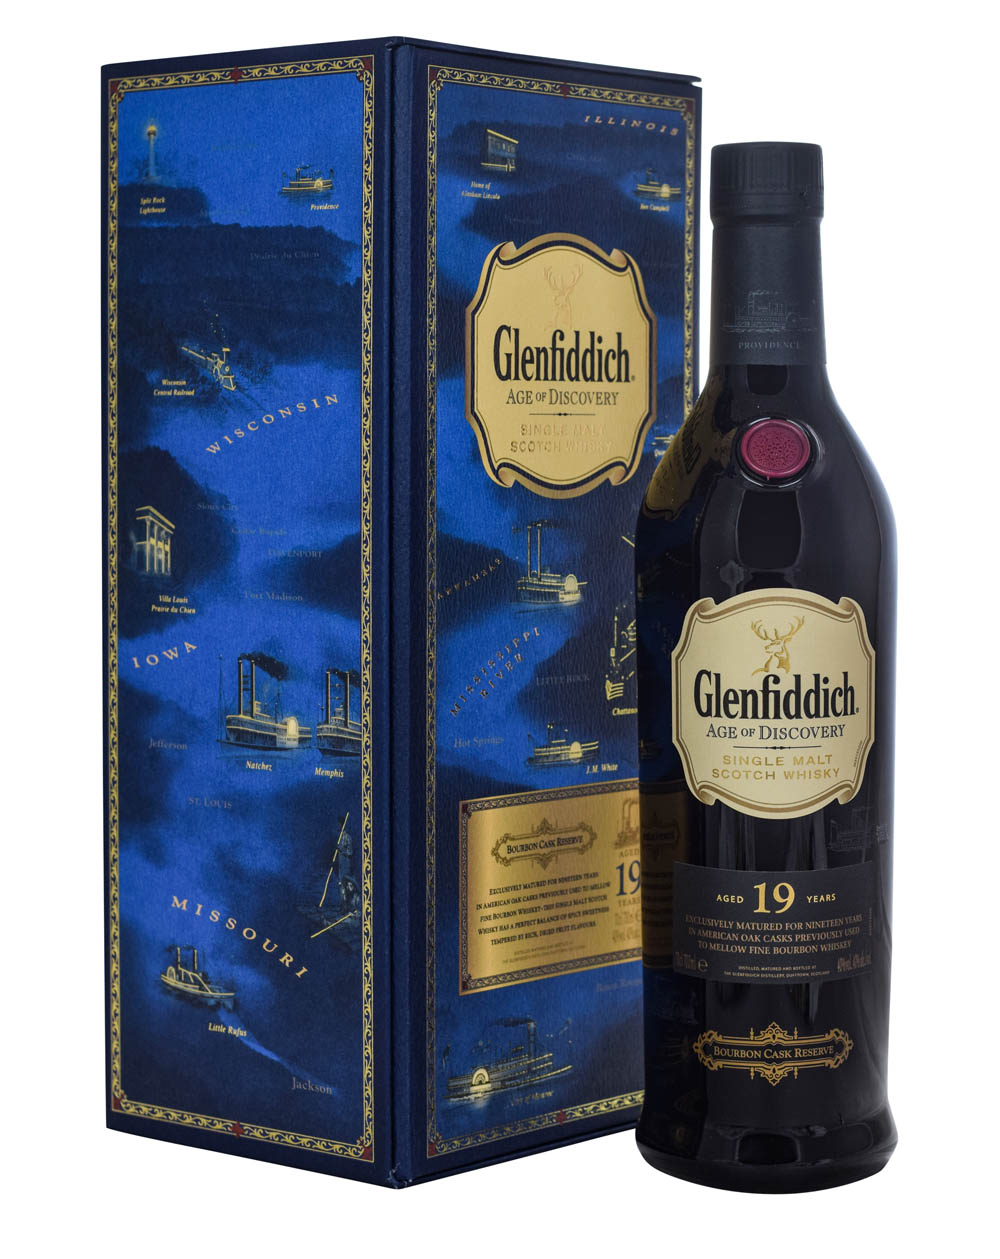 Glenfiddich Age of Discovery Bourbon Cask Reserve 19 Years Old Box Musthave Malts MHM